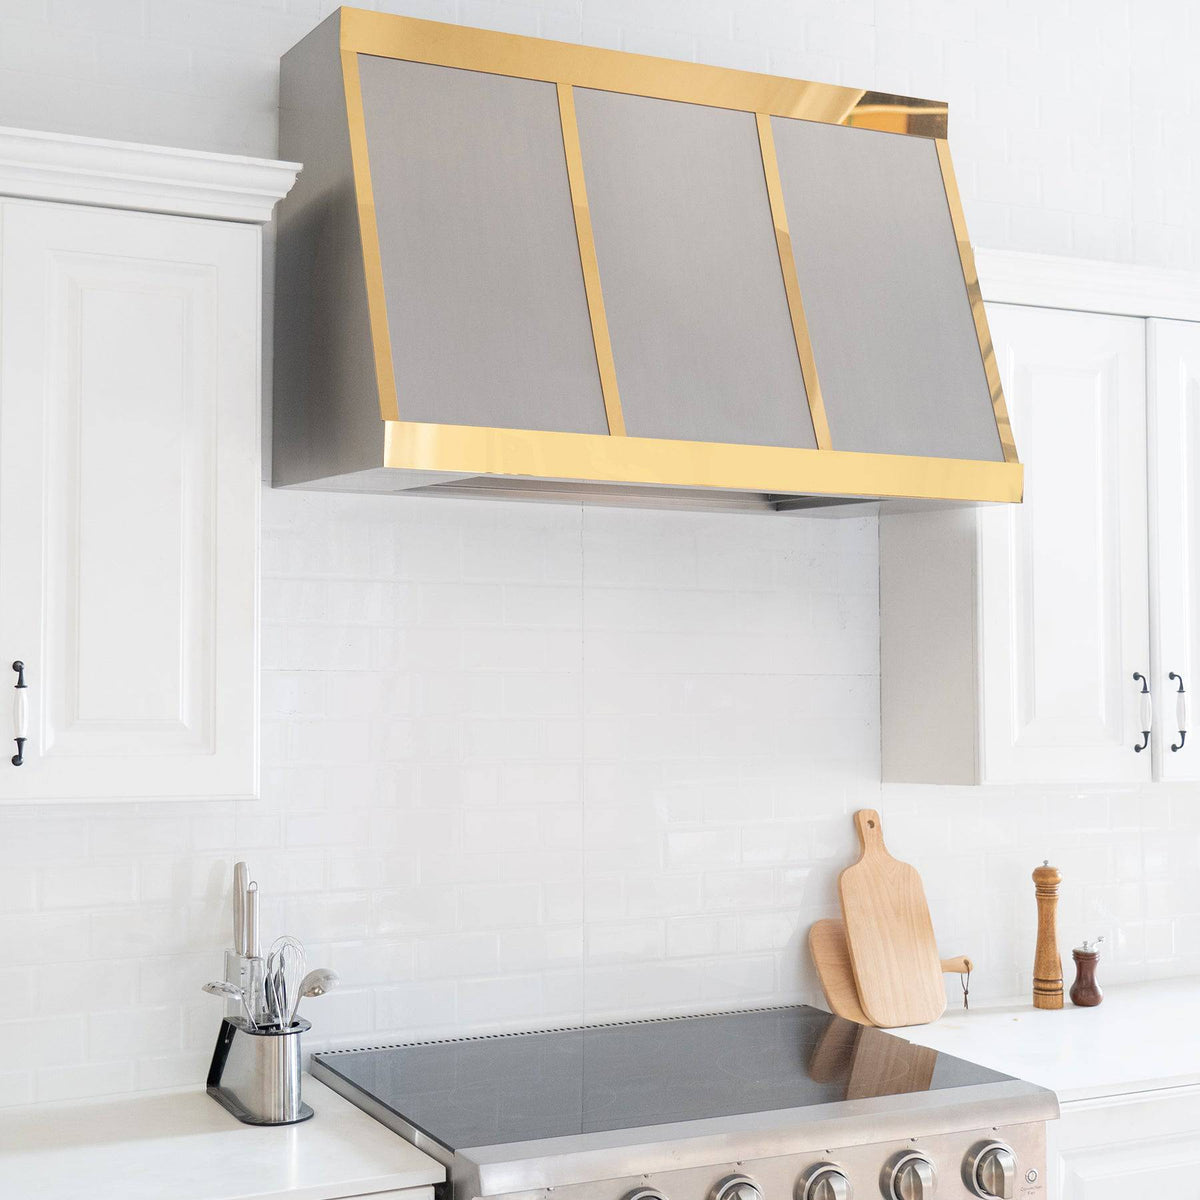 Fobest Handcrafted Angled Design Stainless Steel Range Hood with Brass Accent FSS-125 - Stainless Steel Range Hood-Fobest Appliance